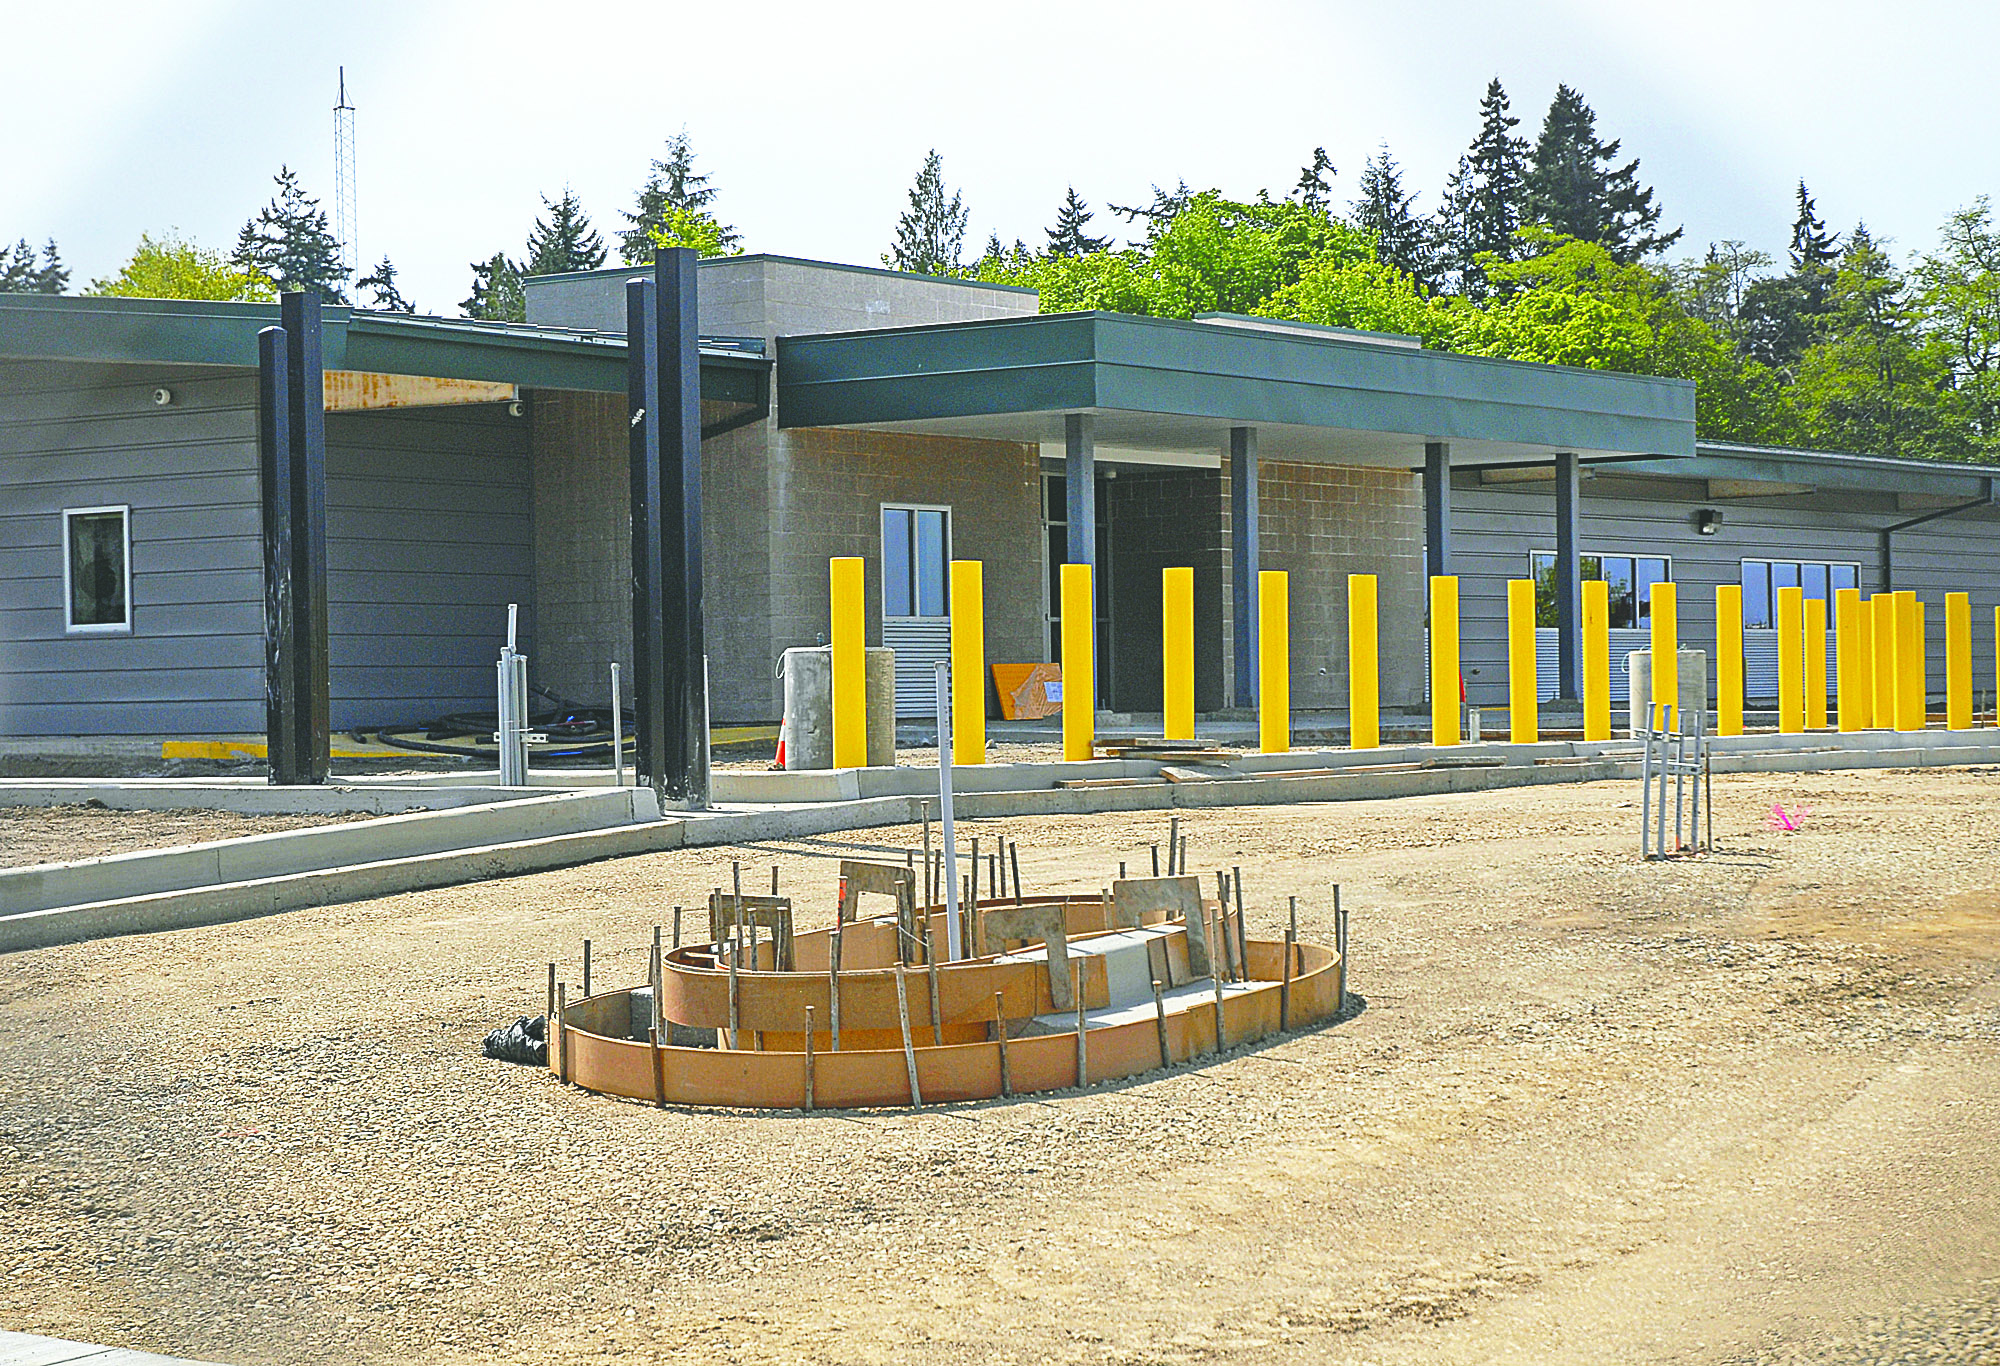 The new Border Patrol offices are under construction in Port Angeles. Chris Tucker/Peninsula Daily News